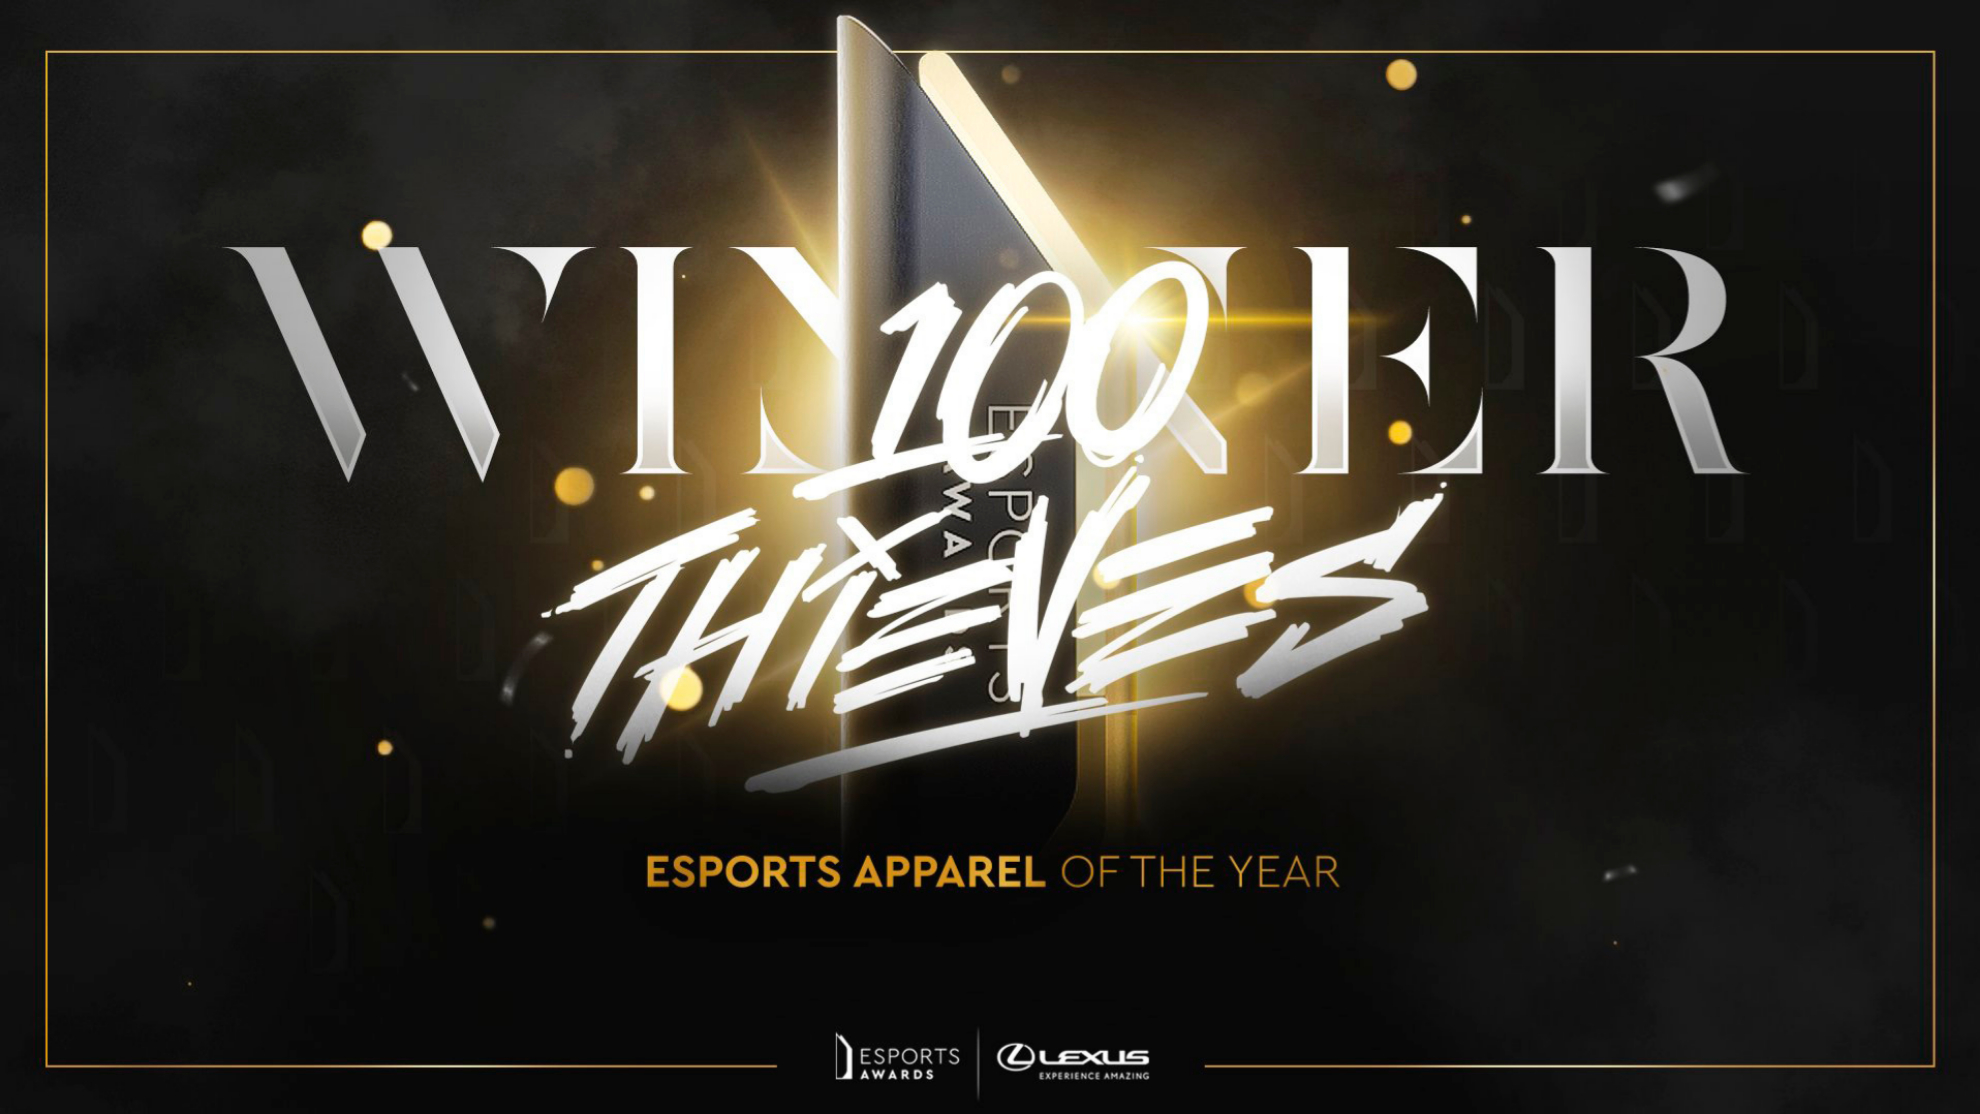 Esports Apparel of the Year